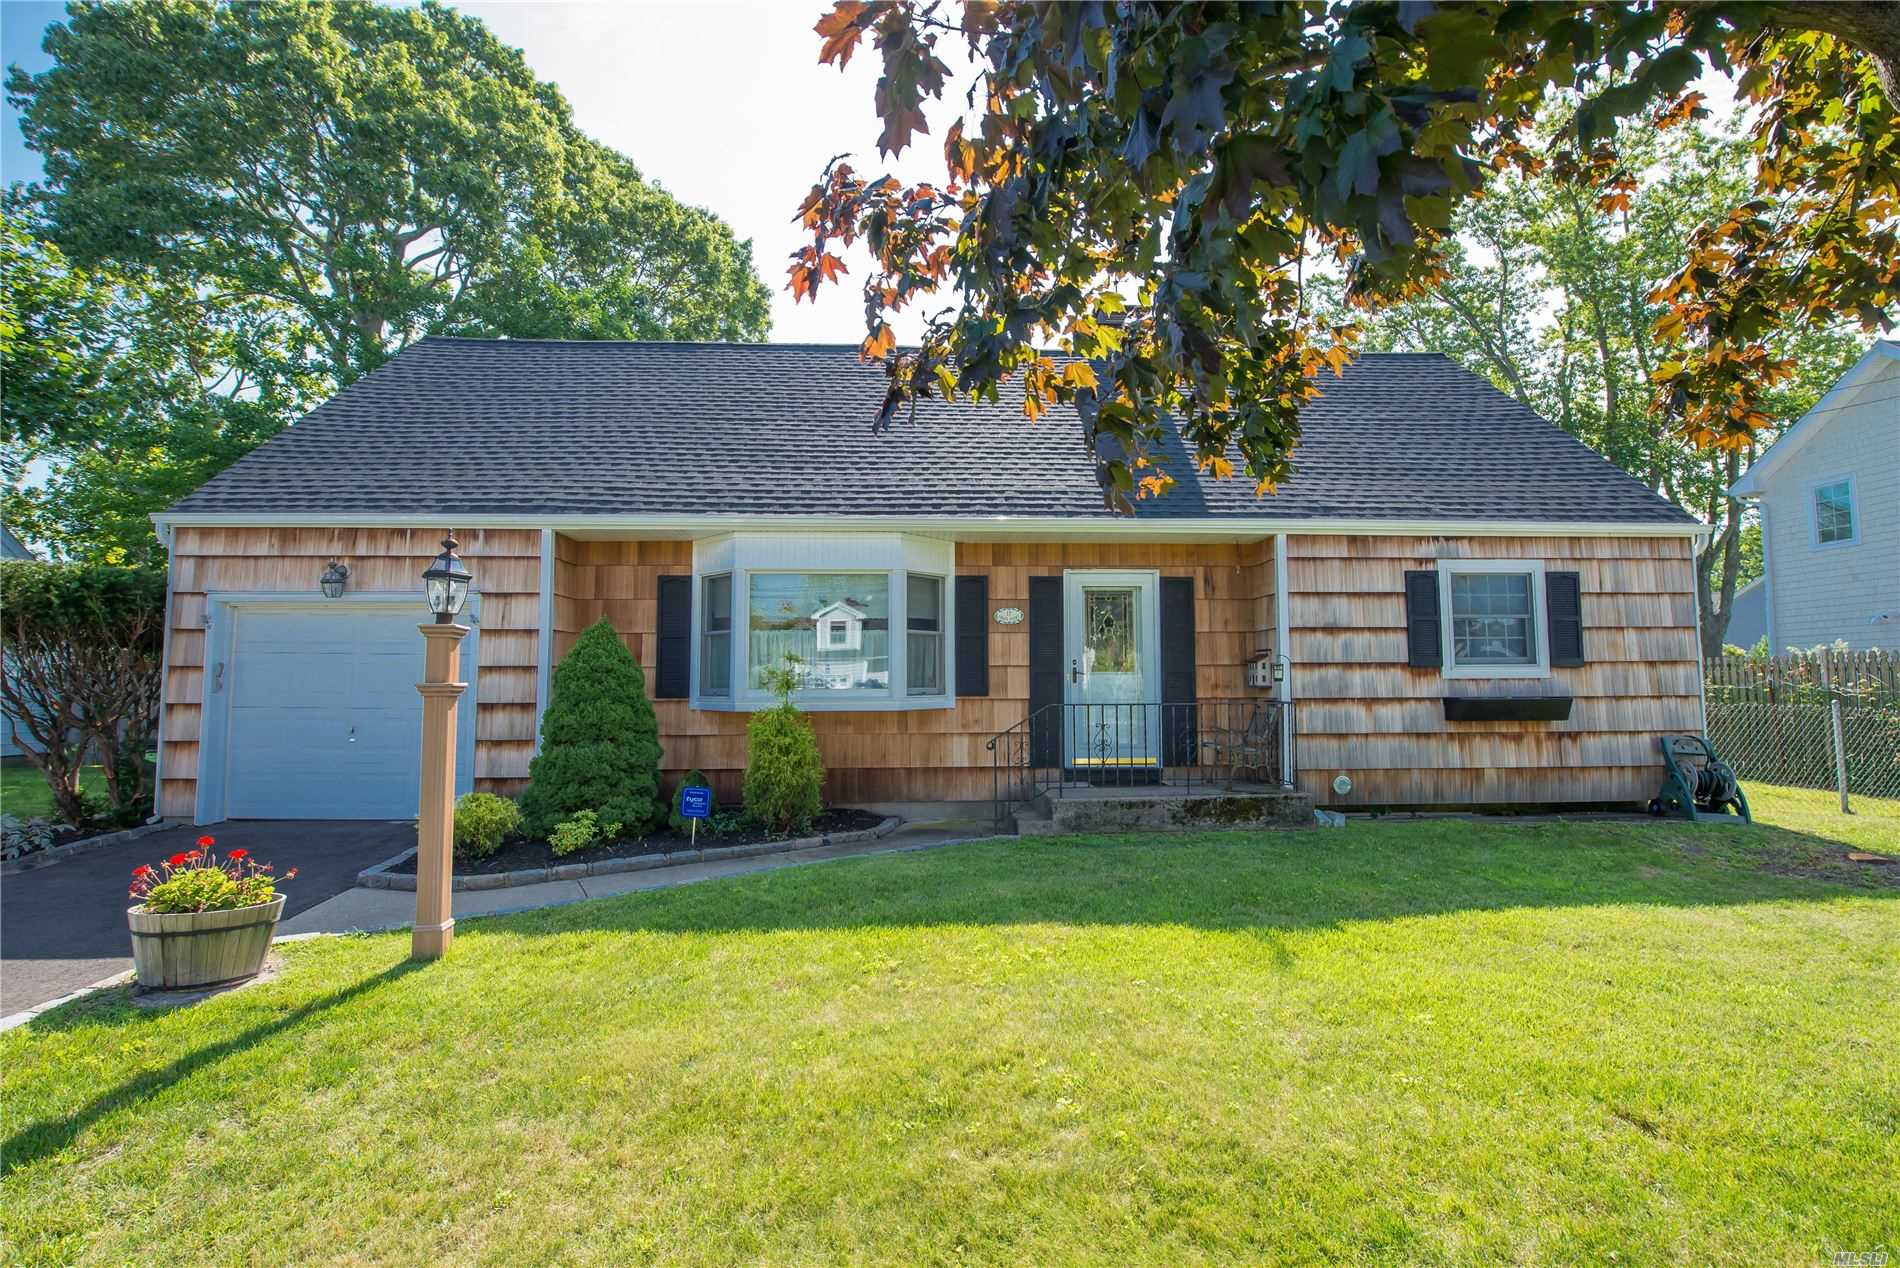 Charming South Islip Cape! Many Updates Including Roof, Siding, Andersen Windows, Hardwood Floors. Den With Fireplace, Formal Living & Dining Rooms, Kitchen With Granite Countertops, Master Bedroom With Walk In Closet, 2 Full Baths, Gas Heat & One Car Garage